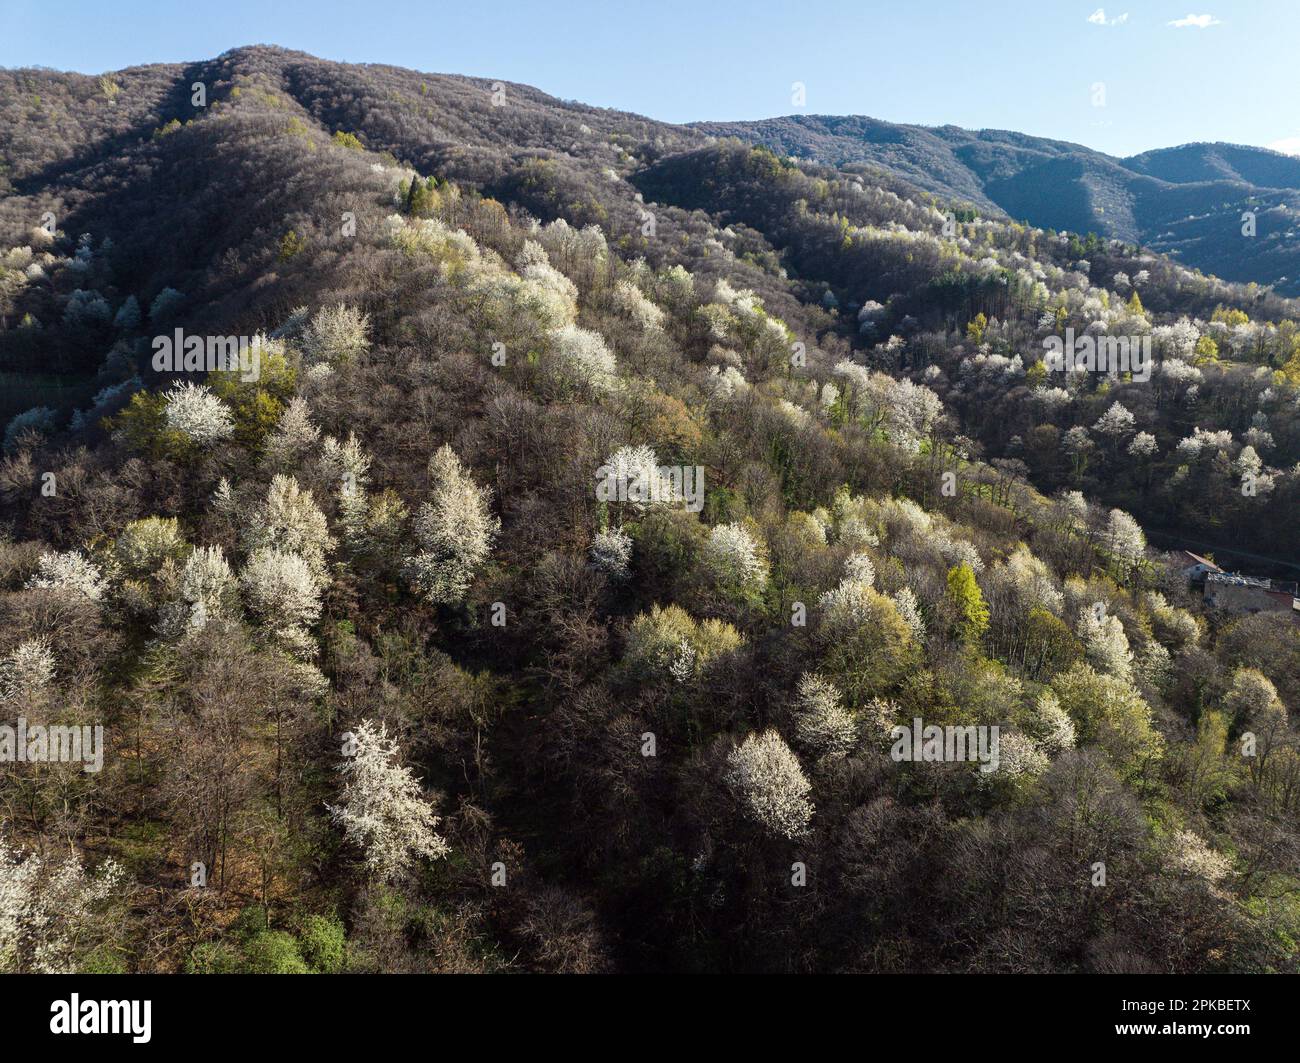 Aerial view of flowering trees in a mountain forest. Spring in nature outdoors. Stock Photo